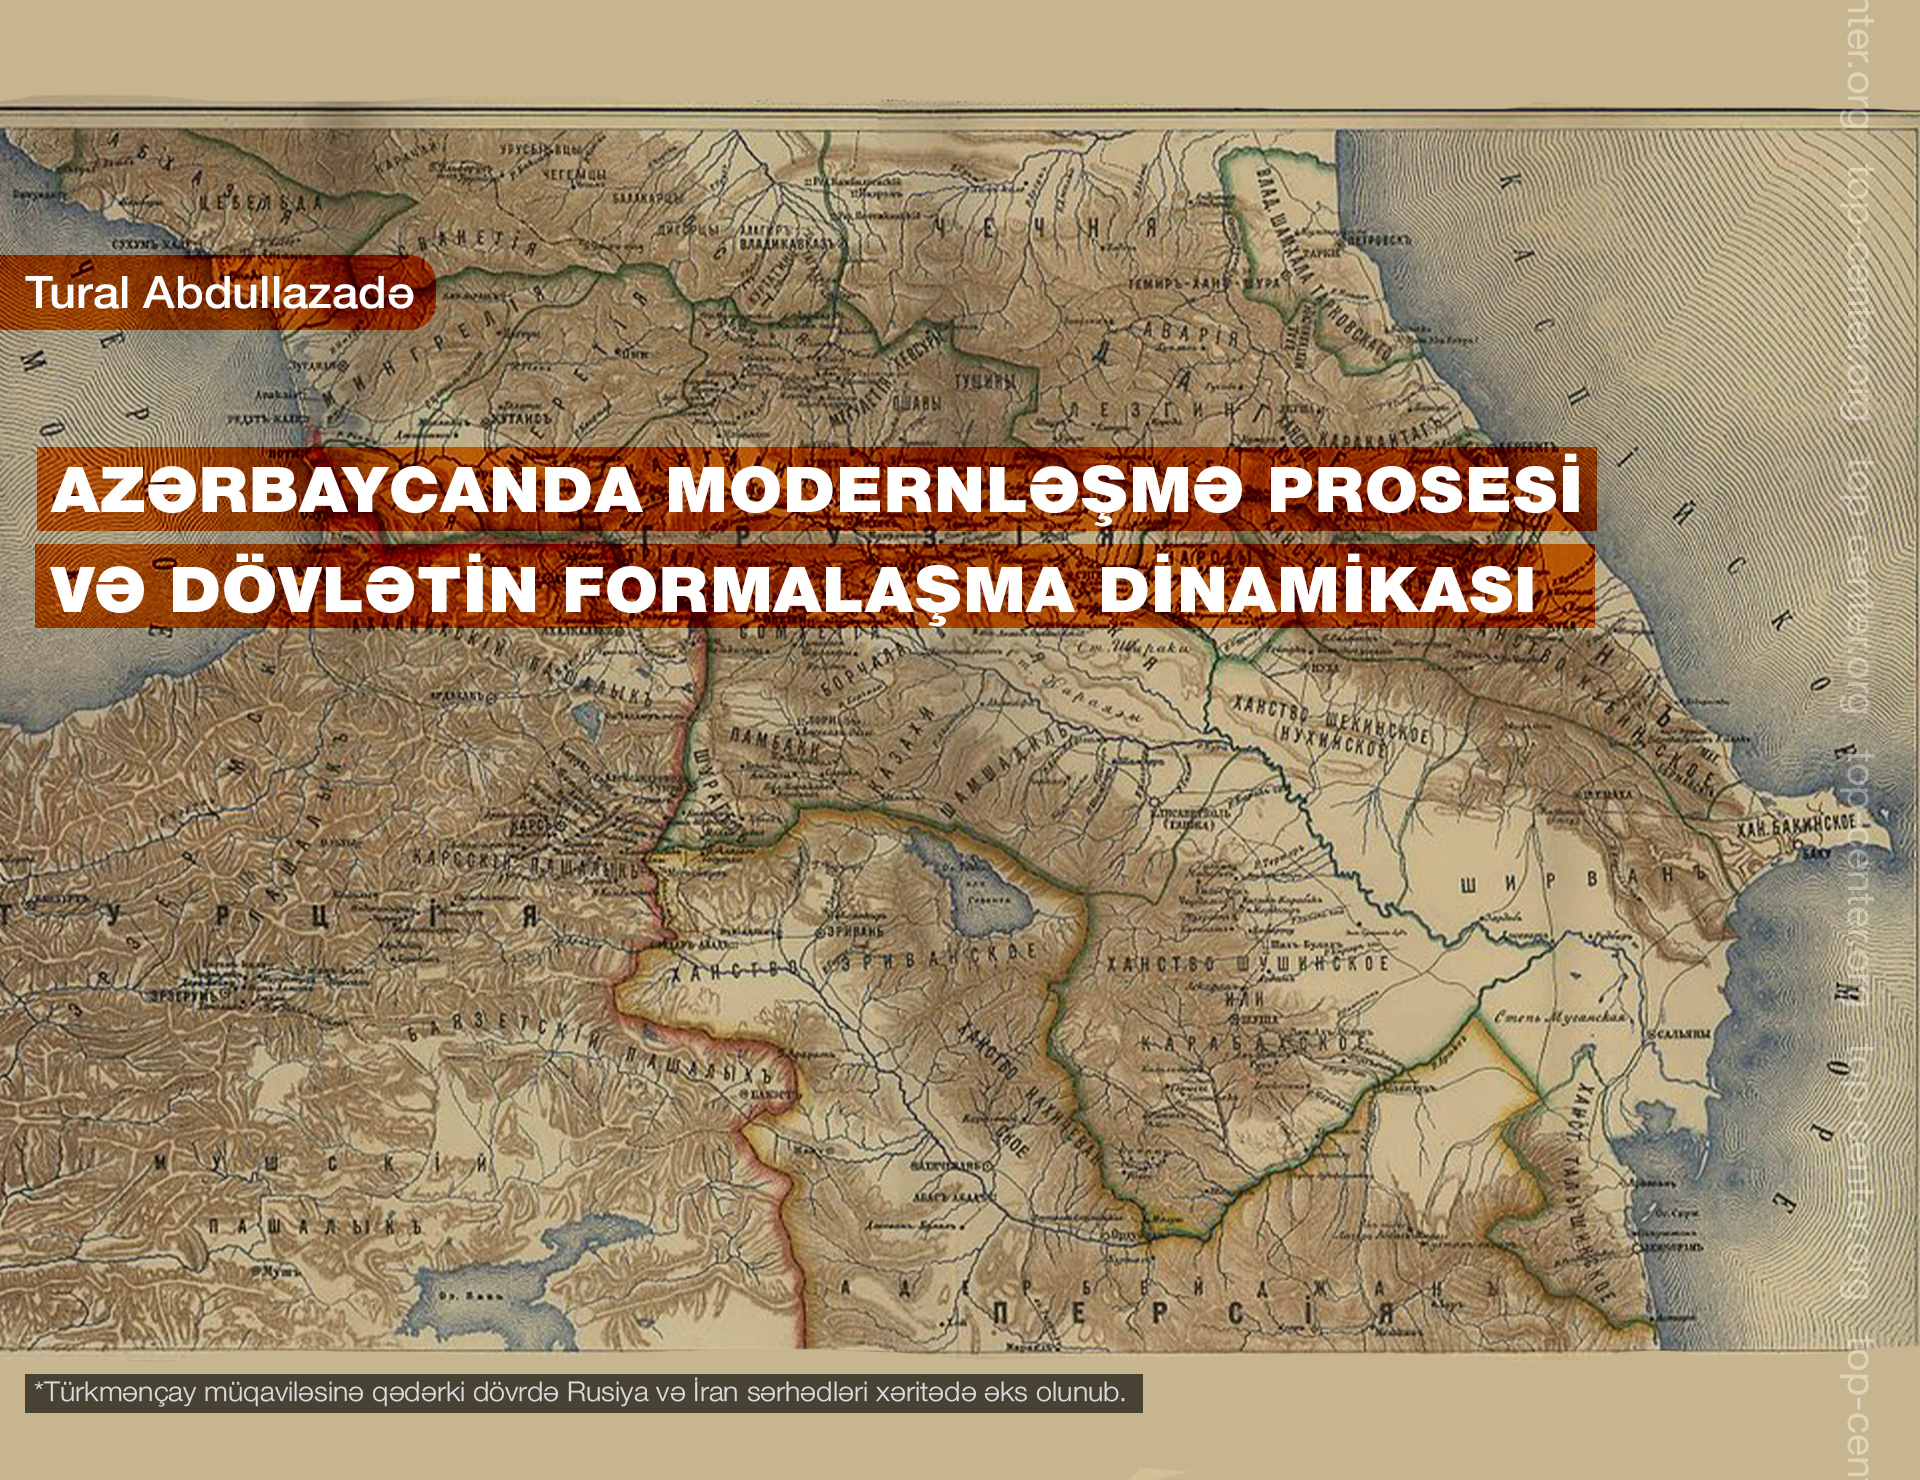 The process of modernization and the dynamics of state formation in Azerbaijan